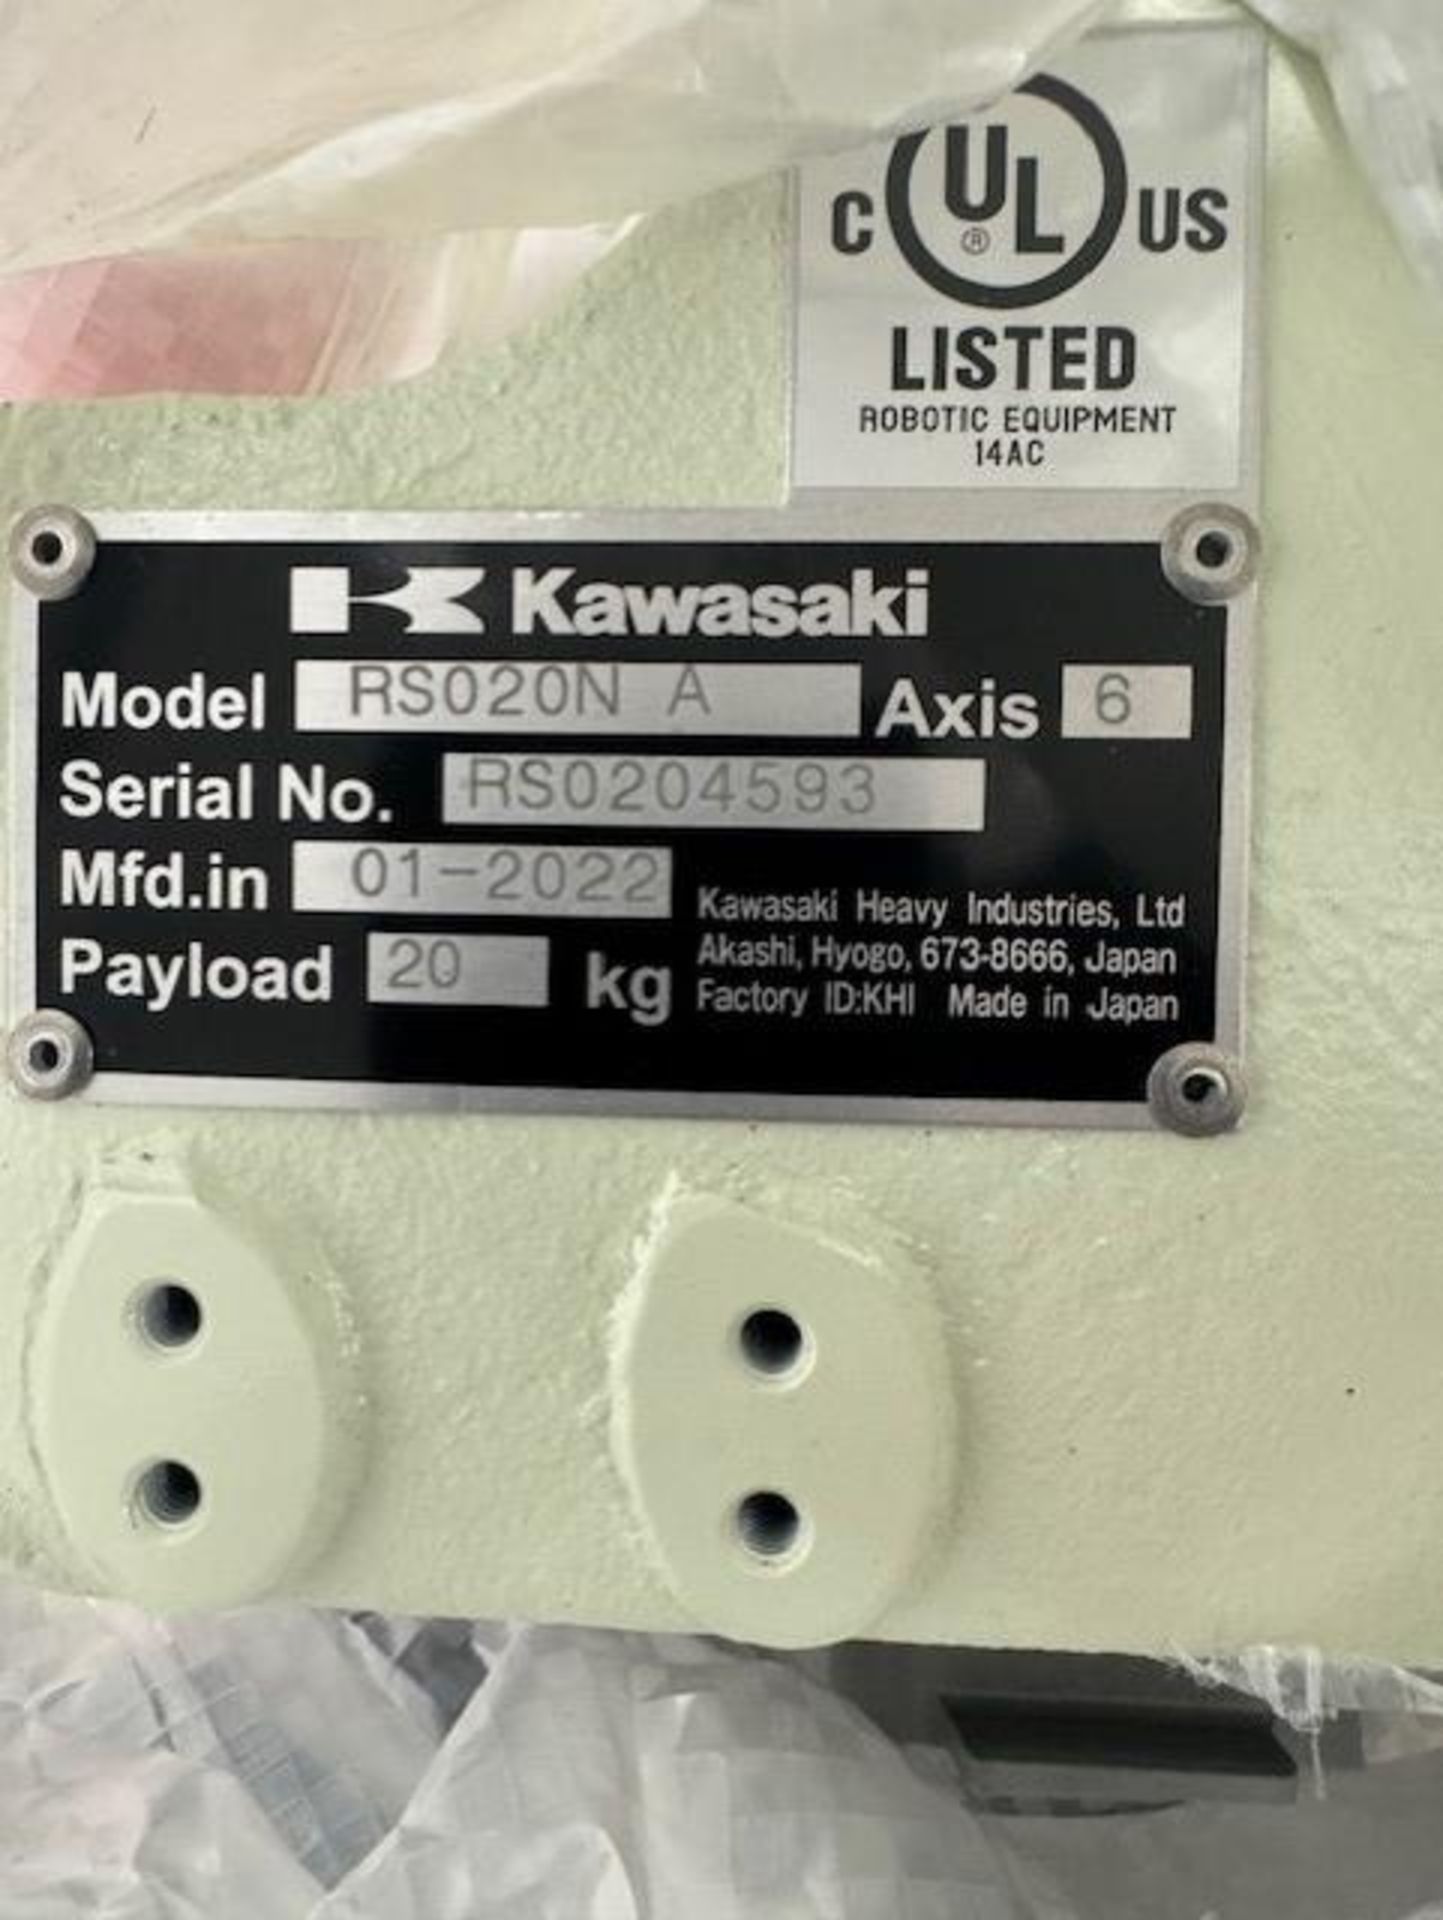 NEW KAWASAKI ROBOT MODEL RS020N, SN 4593, 20KG X 1725MM REACH WITH EO1 CONTROLS, CABLES & TEACH - Image 7 of 7